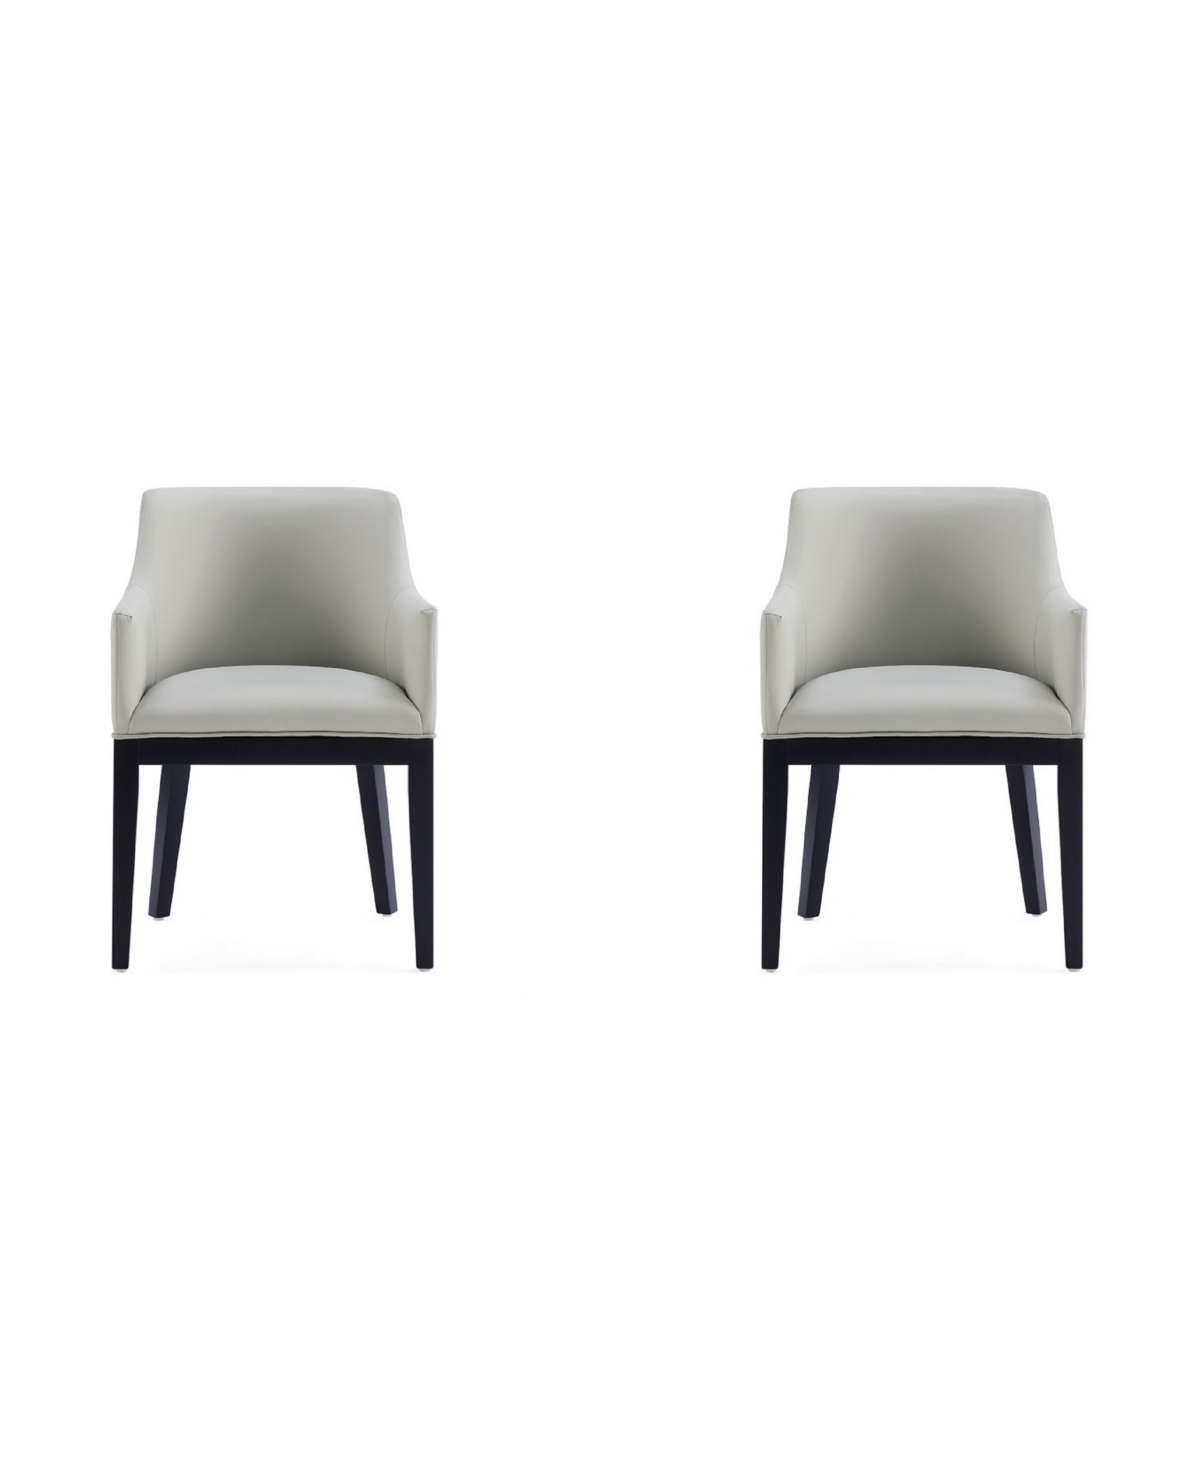 Manhattan Comfort Gansevoort 2 Piece Beech Wood Faux Leather Upholstered Dining Armchair Set In Stone Gray